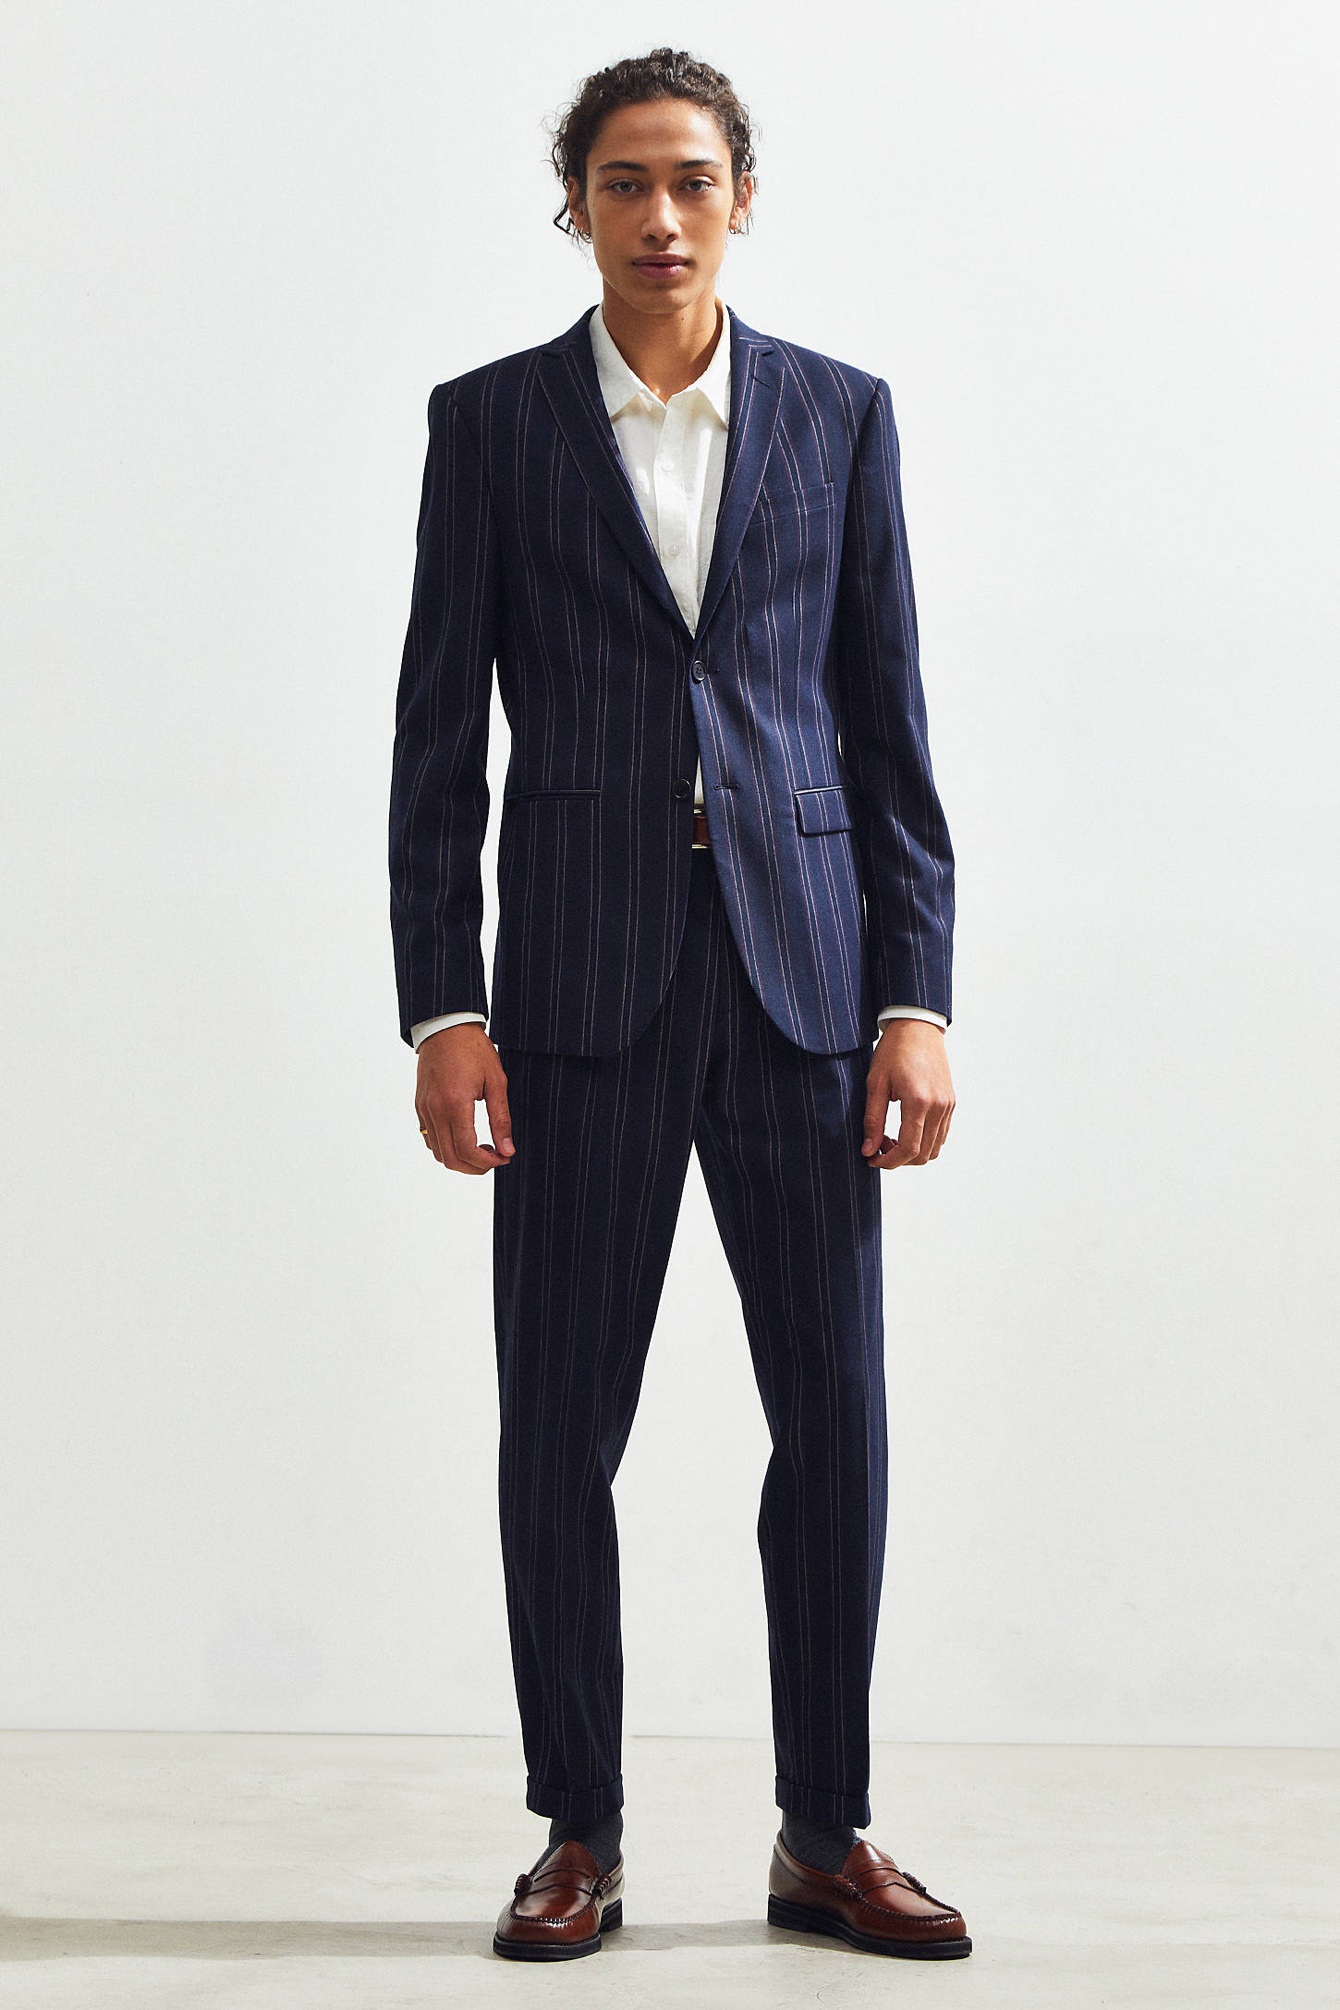 The Unexpected Brand Making Affordable Suits - Urban Outfitters | Valet.